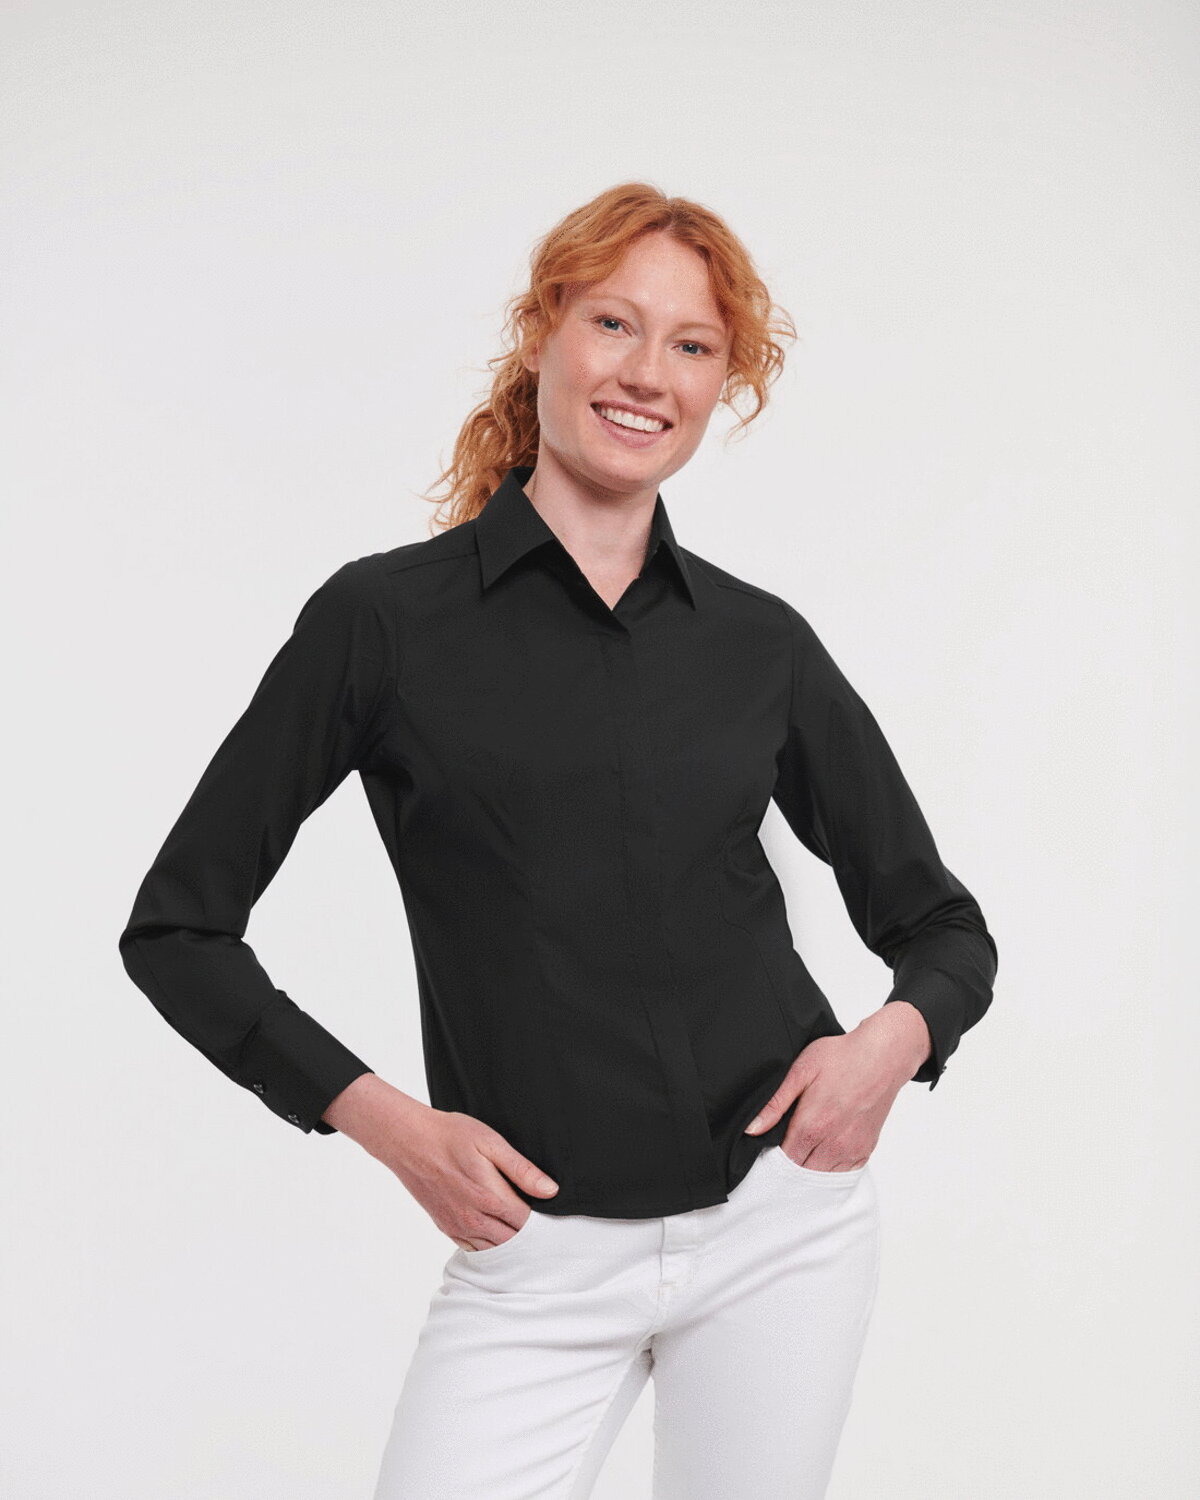 LADIES LONG SLEEVE FITTED POLYCOTTON POPLIN SHIRT